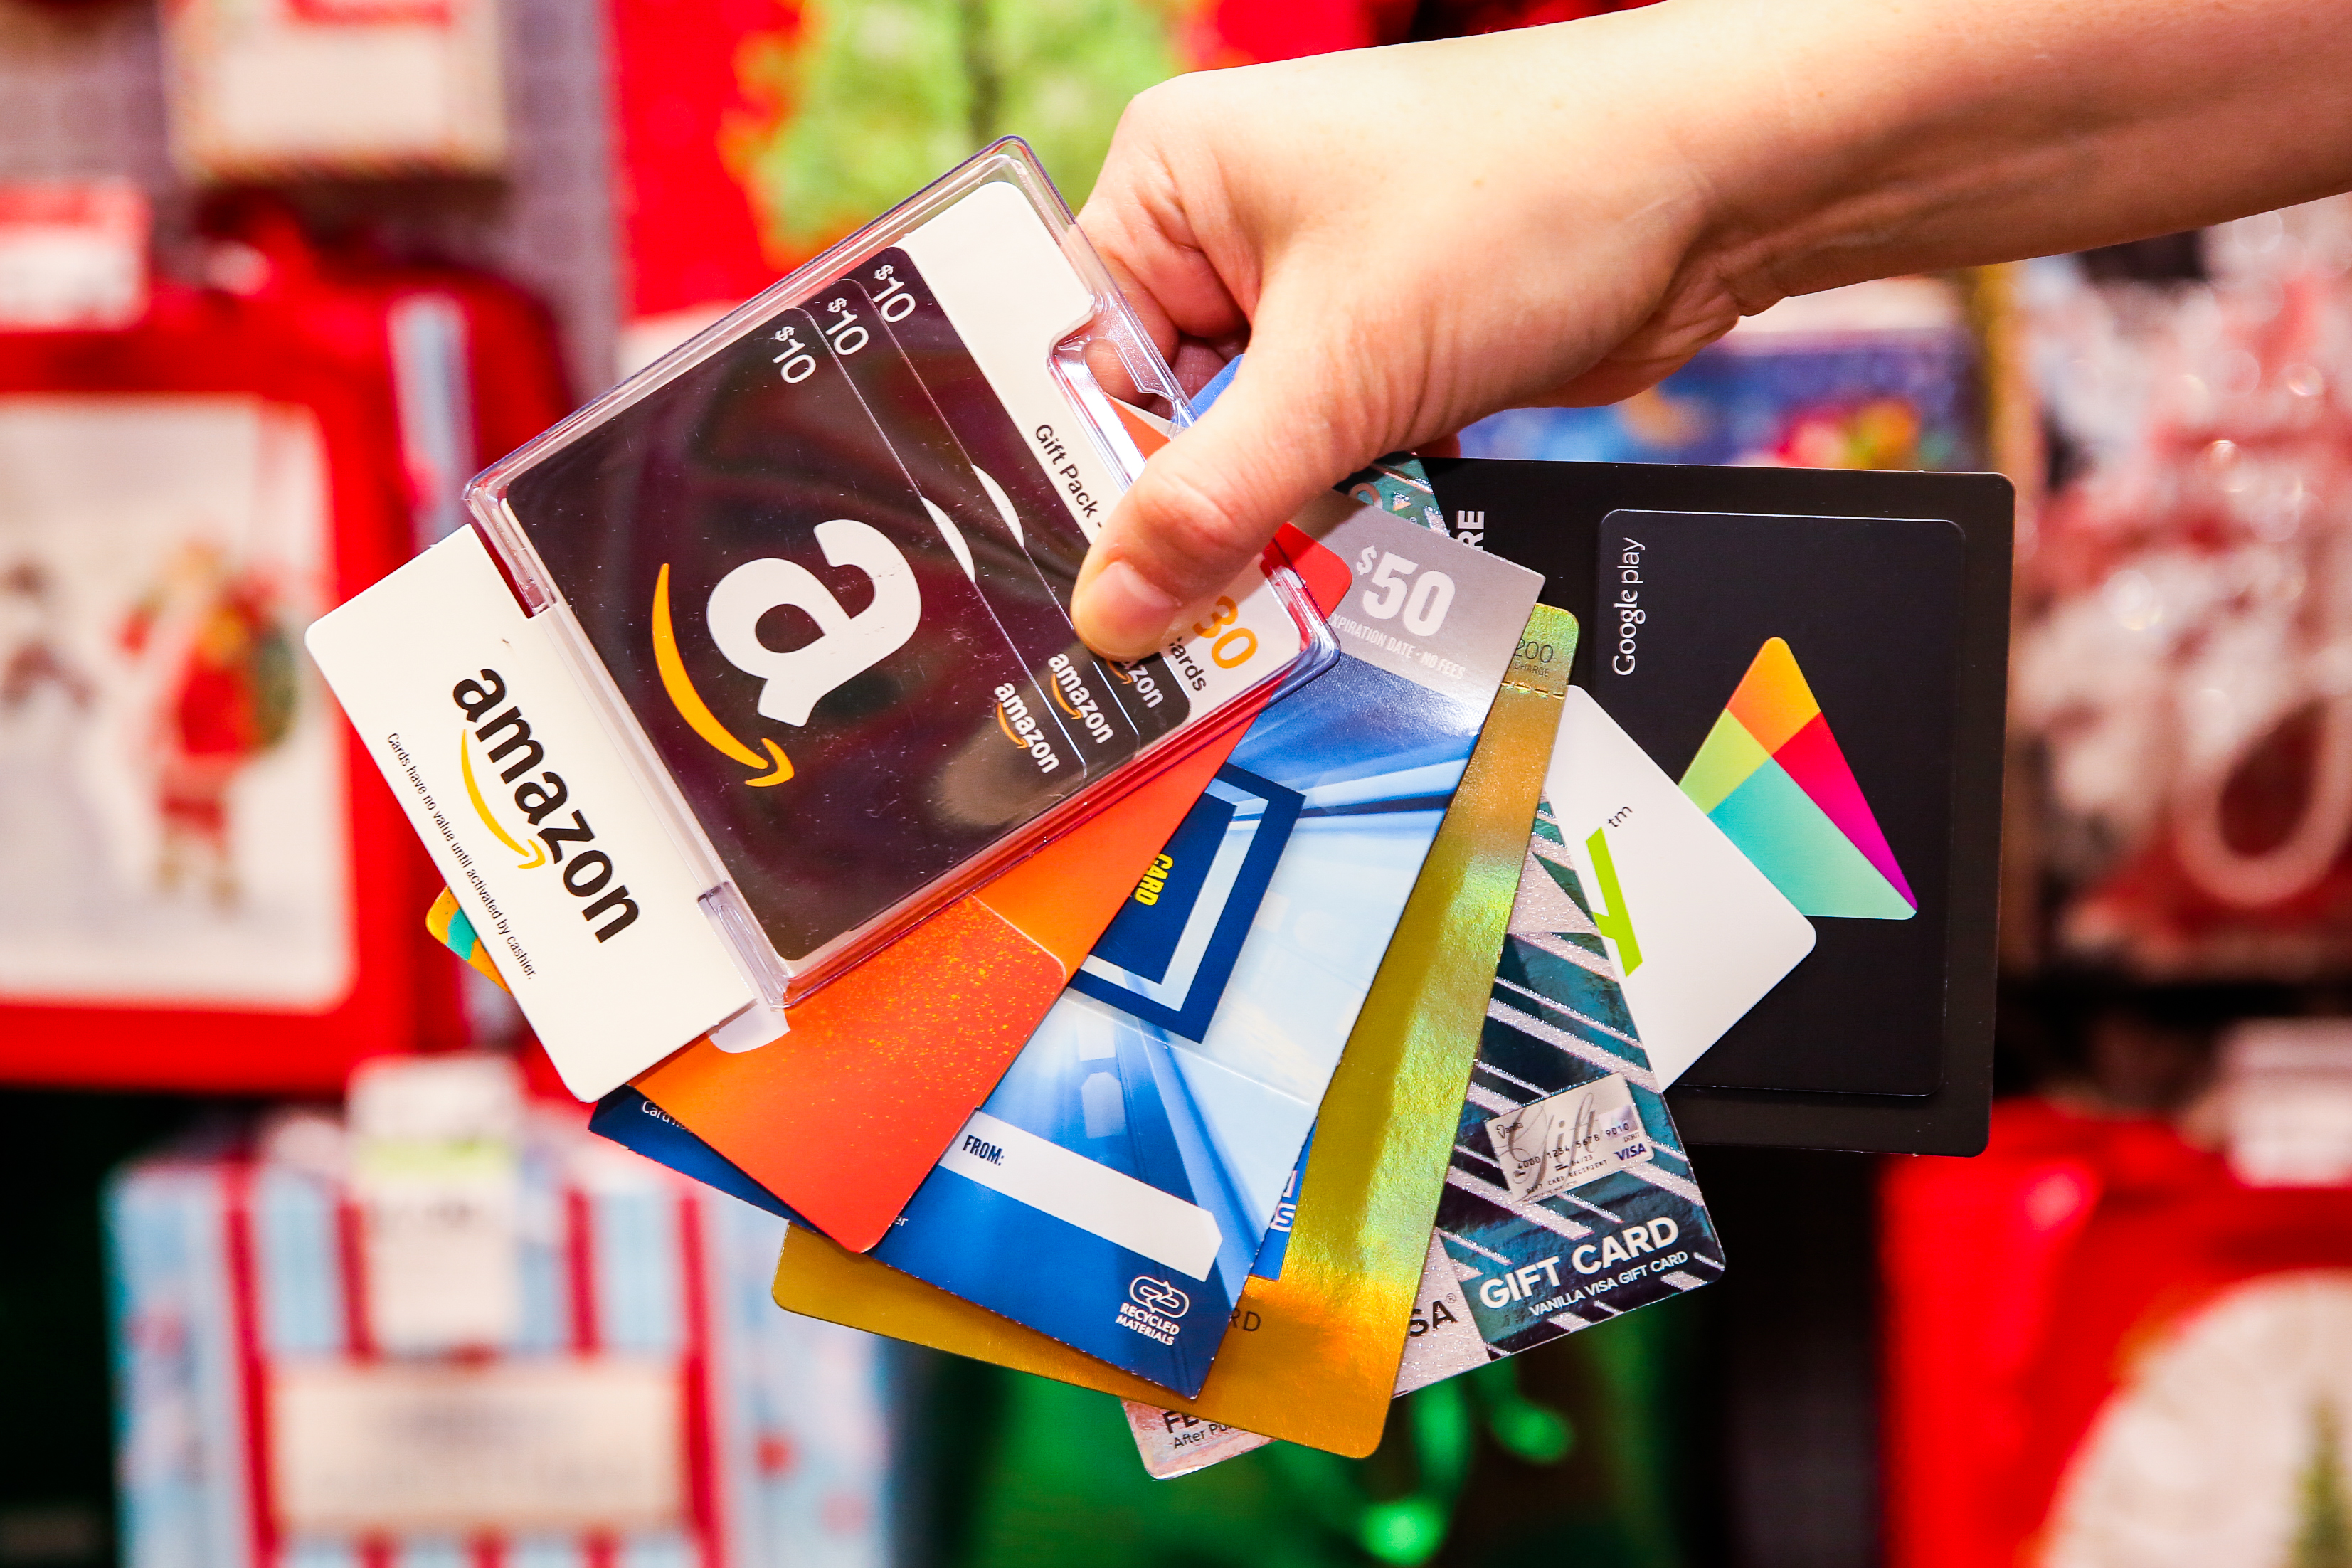 How to sell or swap gift cards - CNET